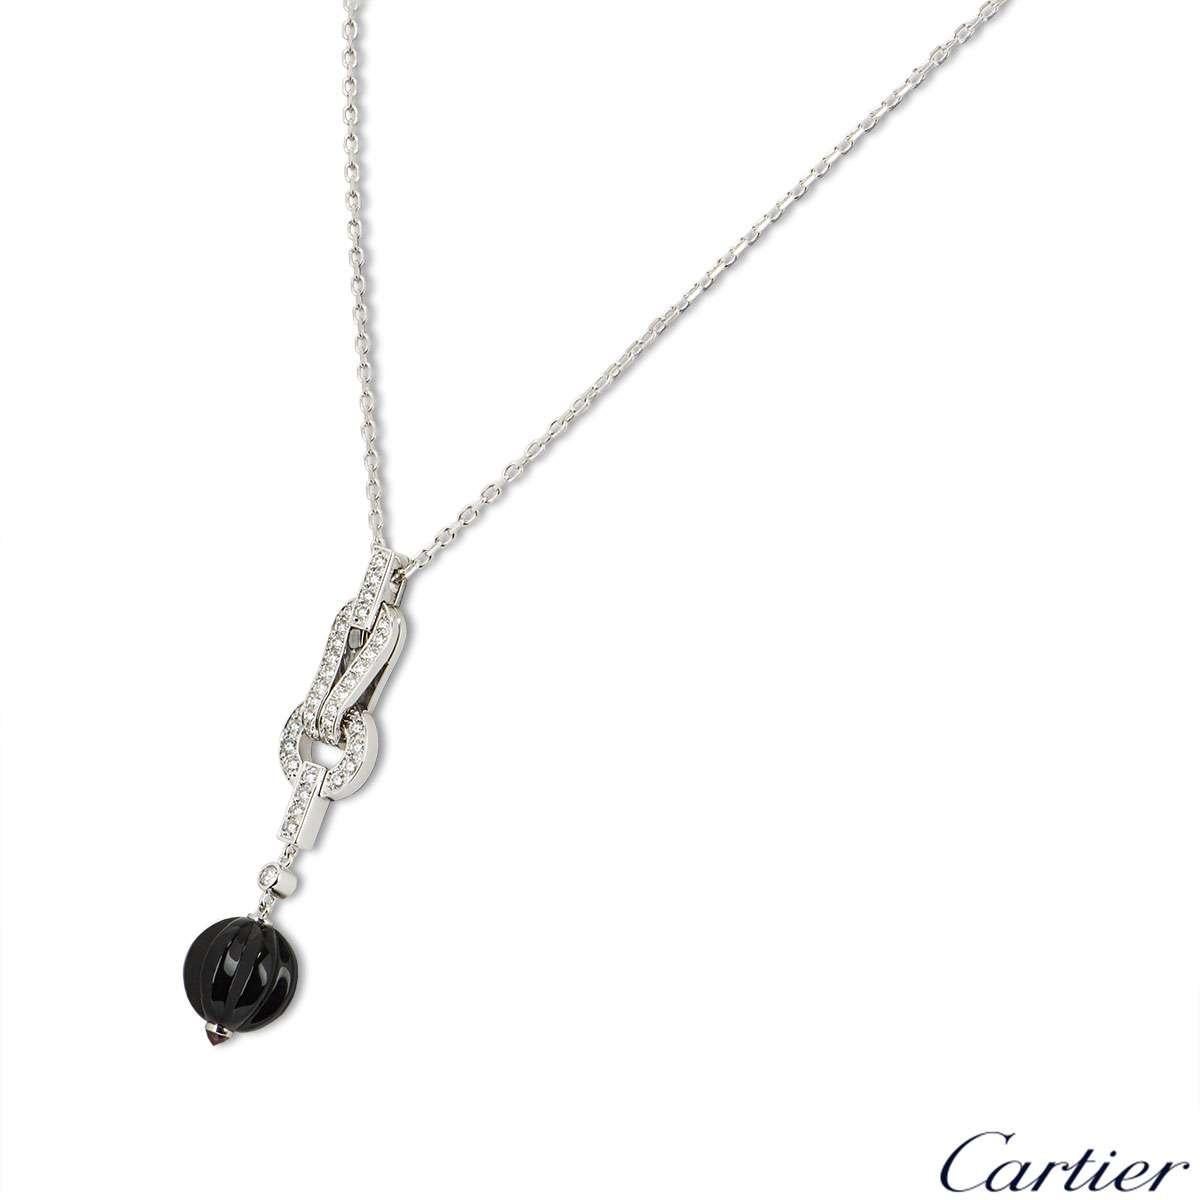 An 18 Carat white gold necklace from the Agrafe collection by Cartier. The necklace features the iconic Agrafe motif set with round brilliant cut diamonds. Suspended beneath the motif is a carved onyx ball measuring 11mm and a rubelite termination.